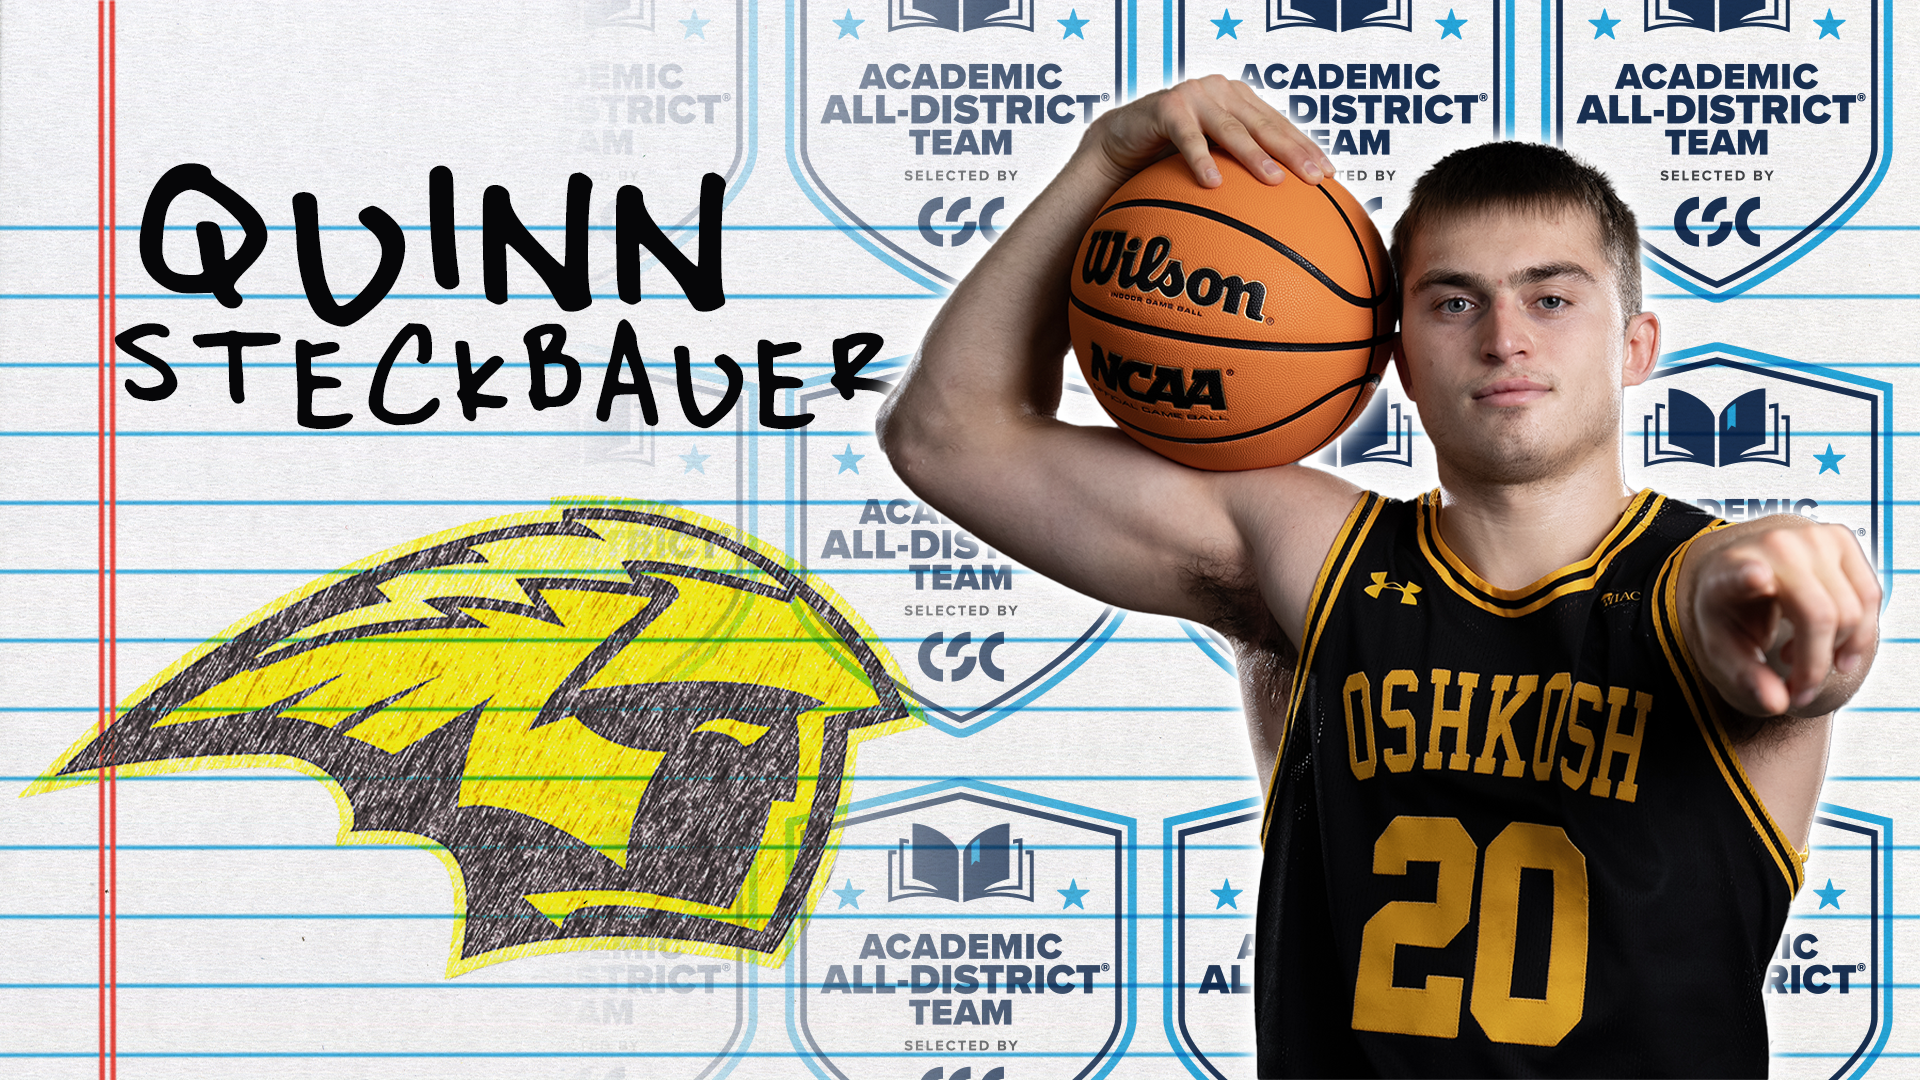 Steckbauer Tabbed For CSC Academic All-District Team